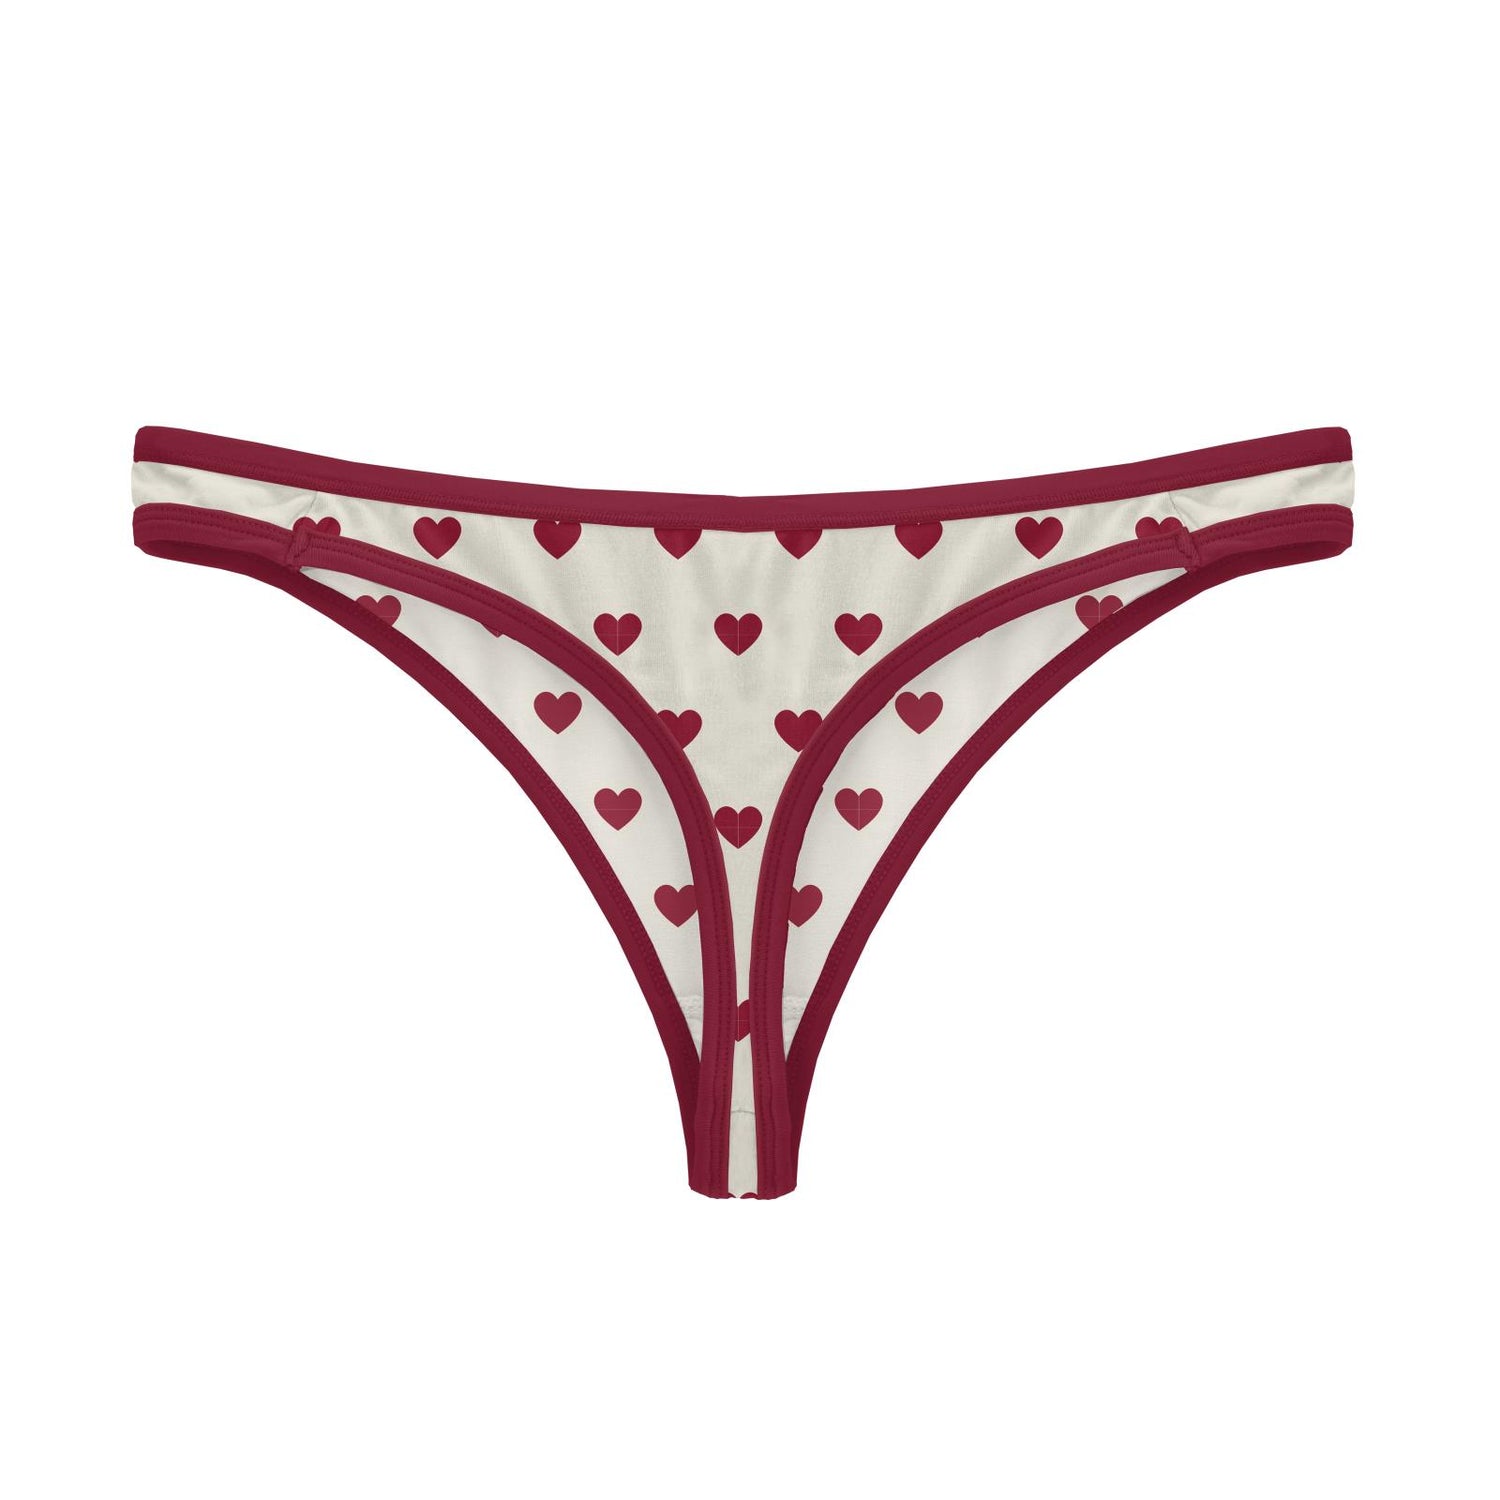 Women's Print Classic Thong Underwear in Natural Hearts